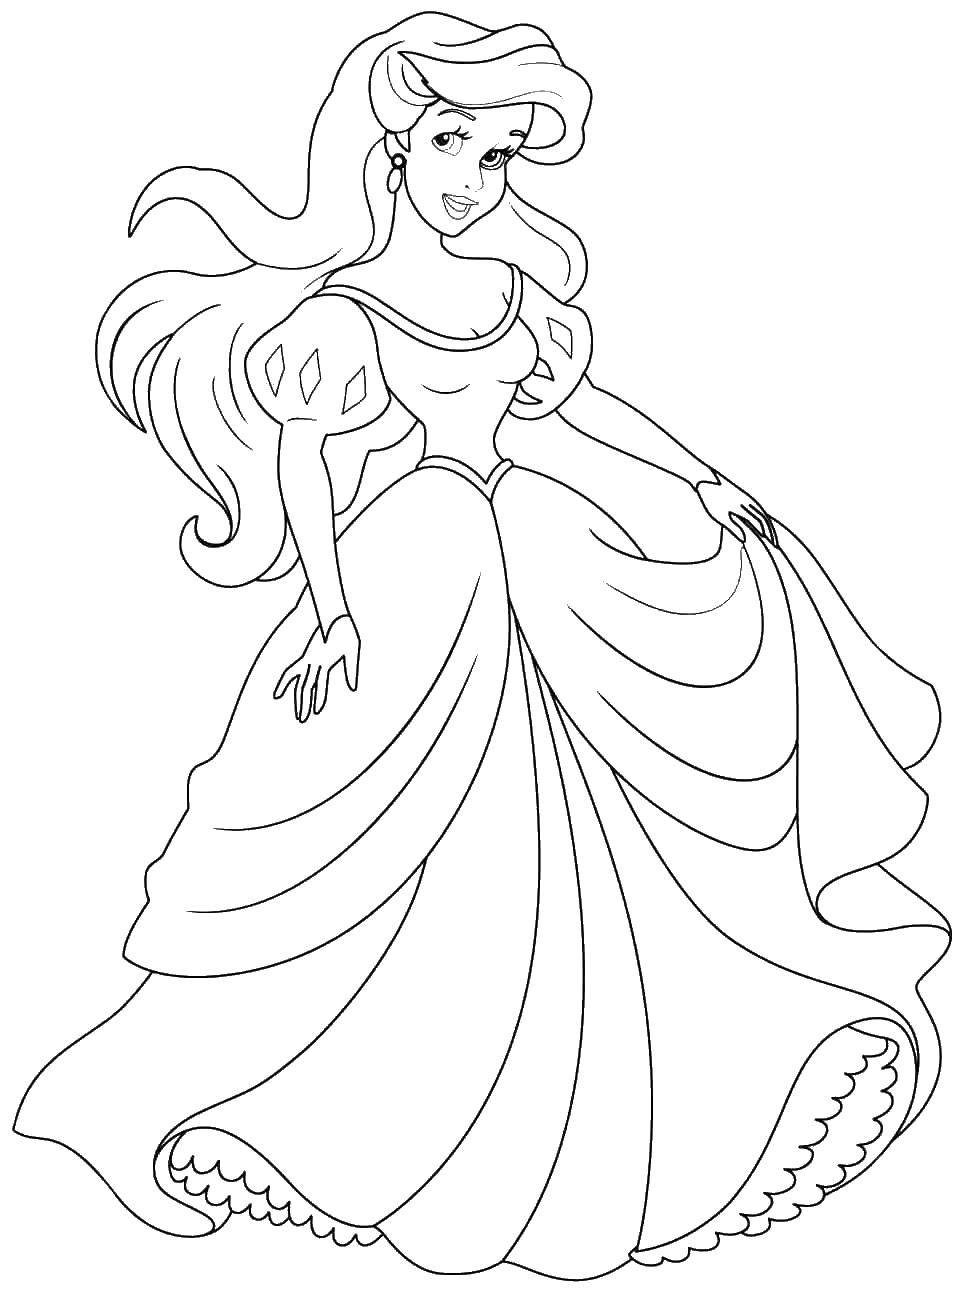 Coloring Ariel in a beautiful dress. Category The little mermaid. Tags:  the little mermaid, Ariel, dress.